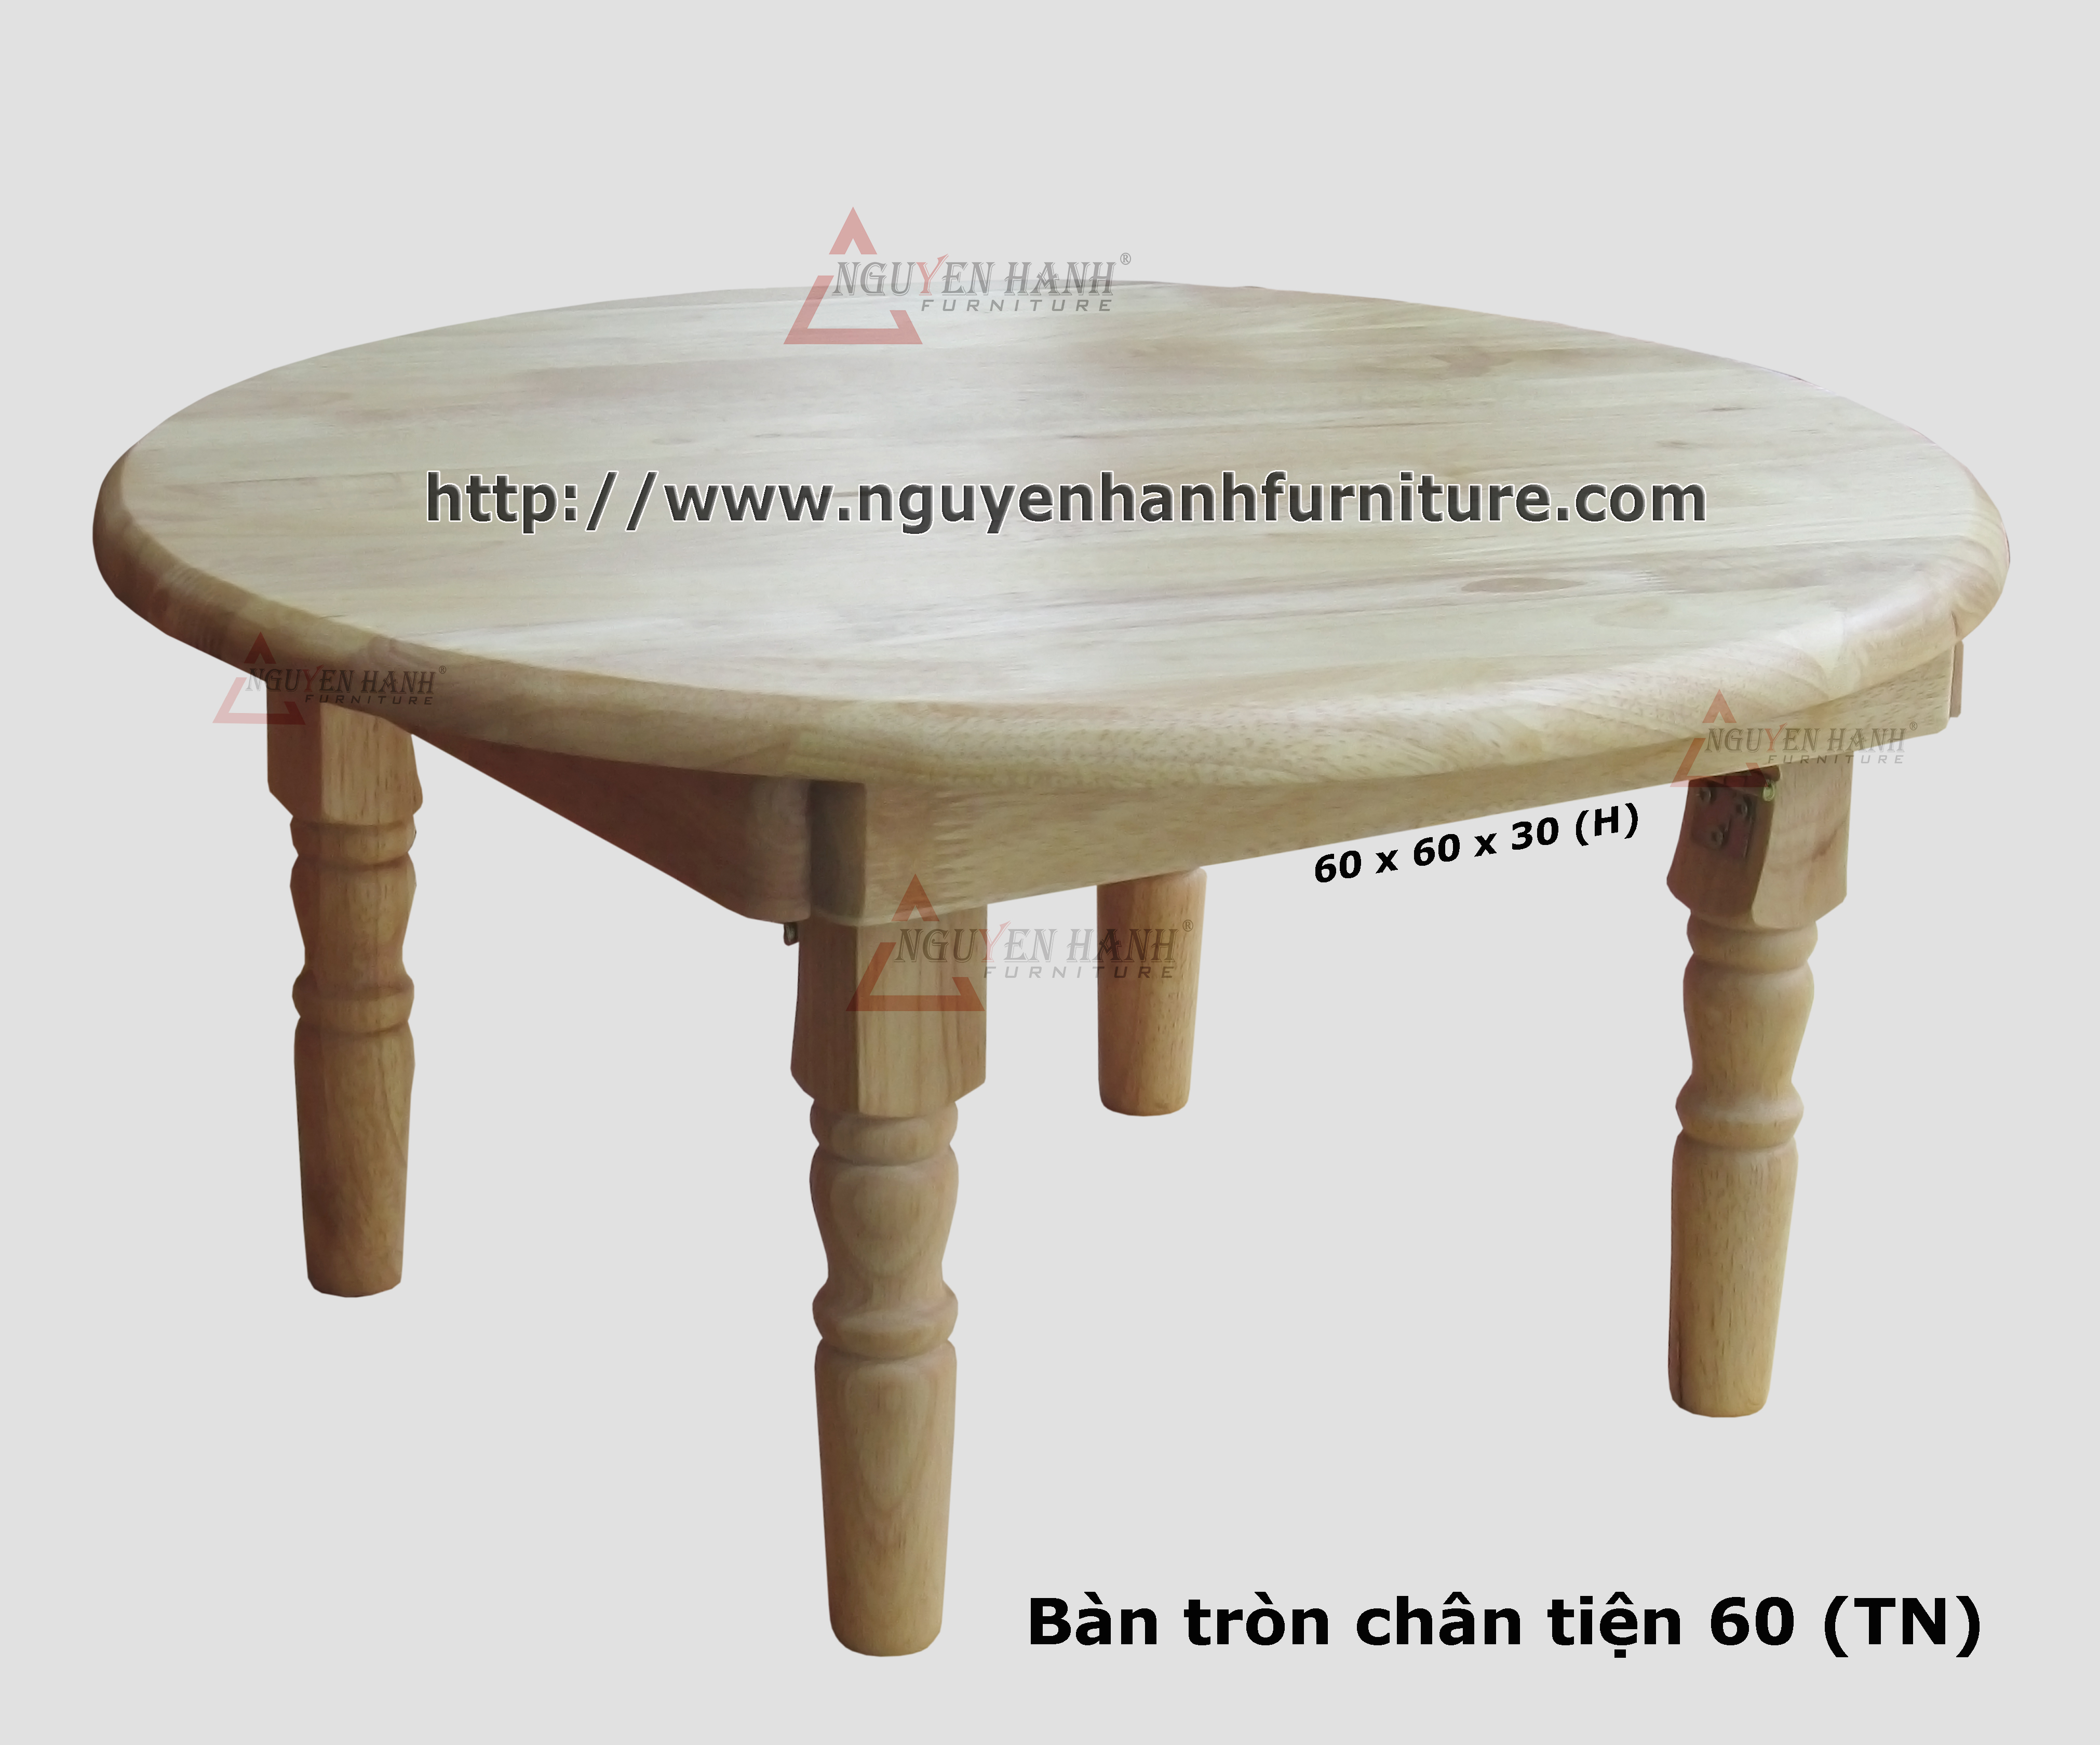 Name product:Round table with turnery legs (Natural) - Dimensions: 60 x 60 x 30 (H) - Description: Wood natural rubber 